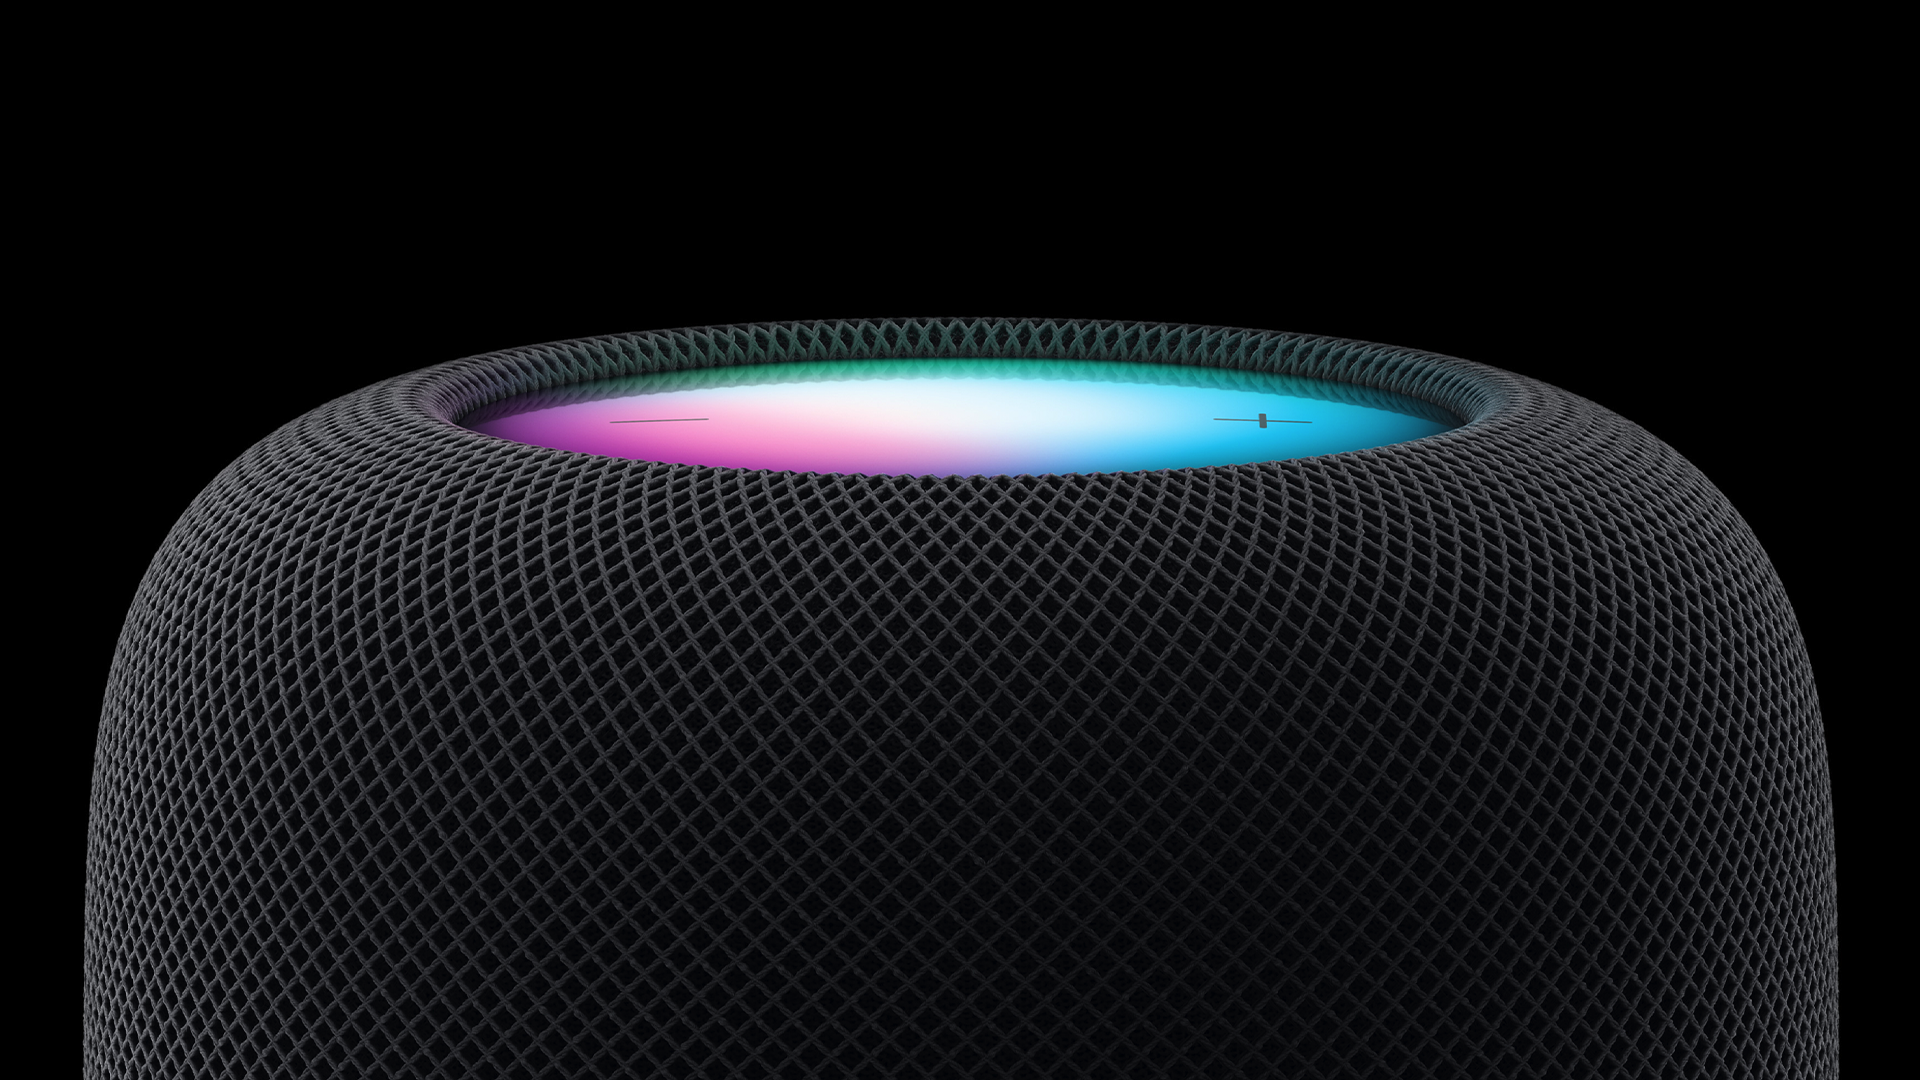 The Original HomePod Returns, and It Might Be Worth Buying This Time